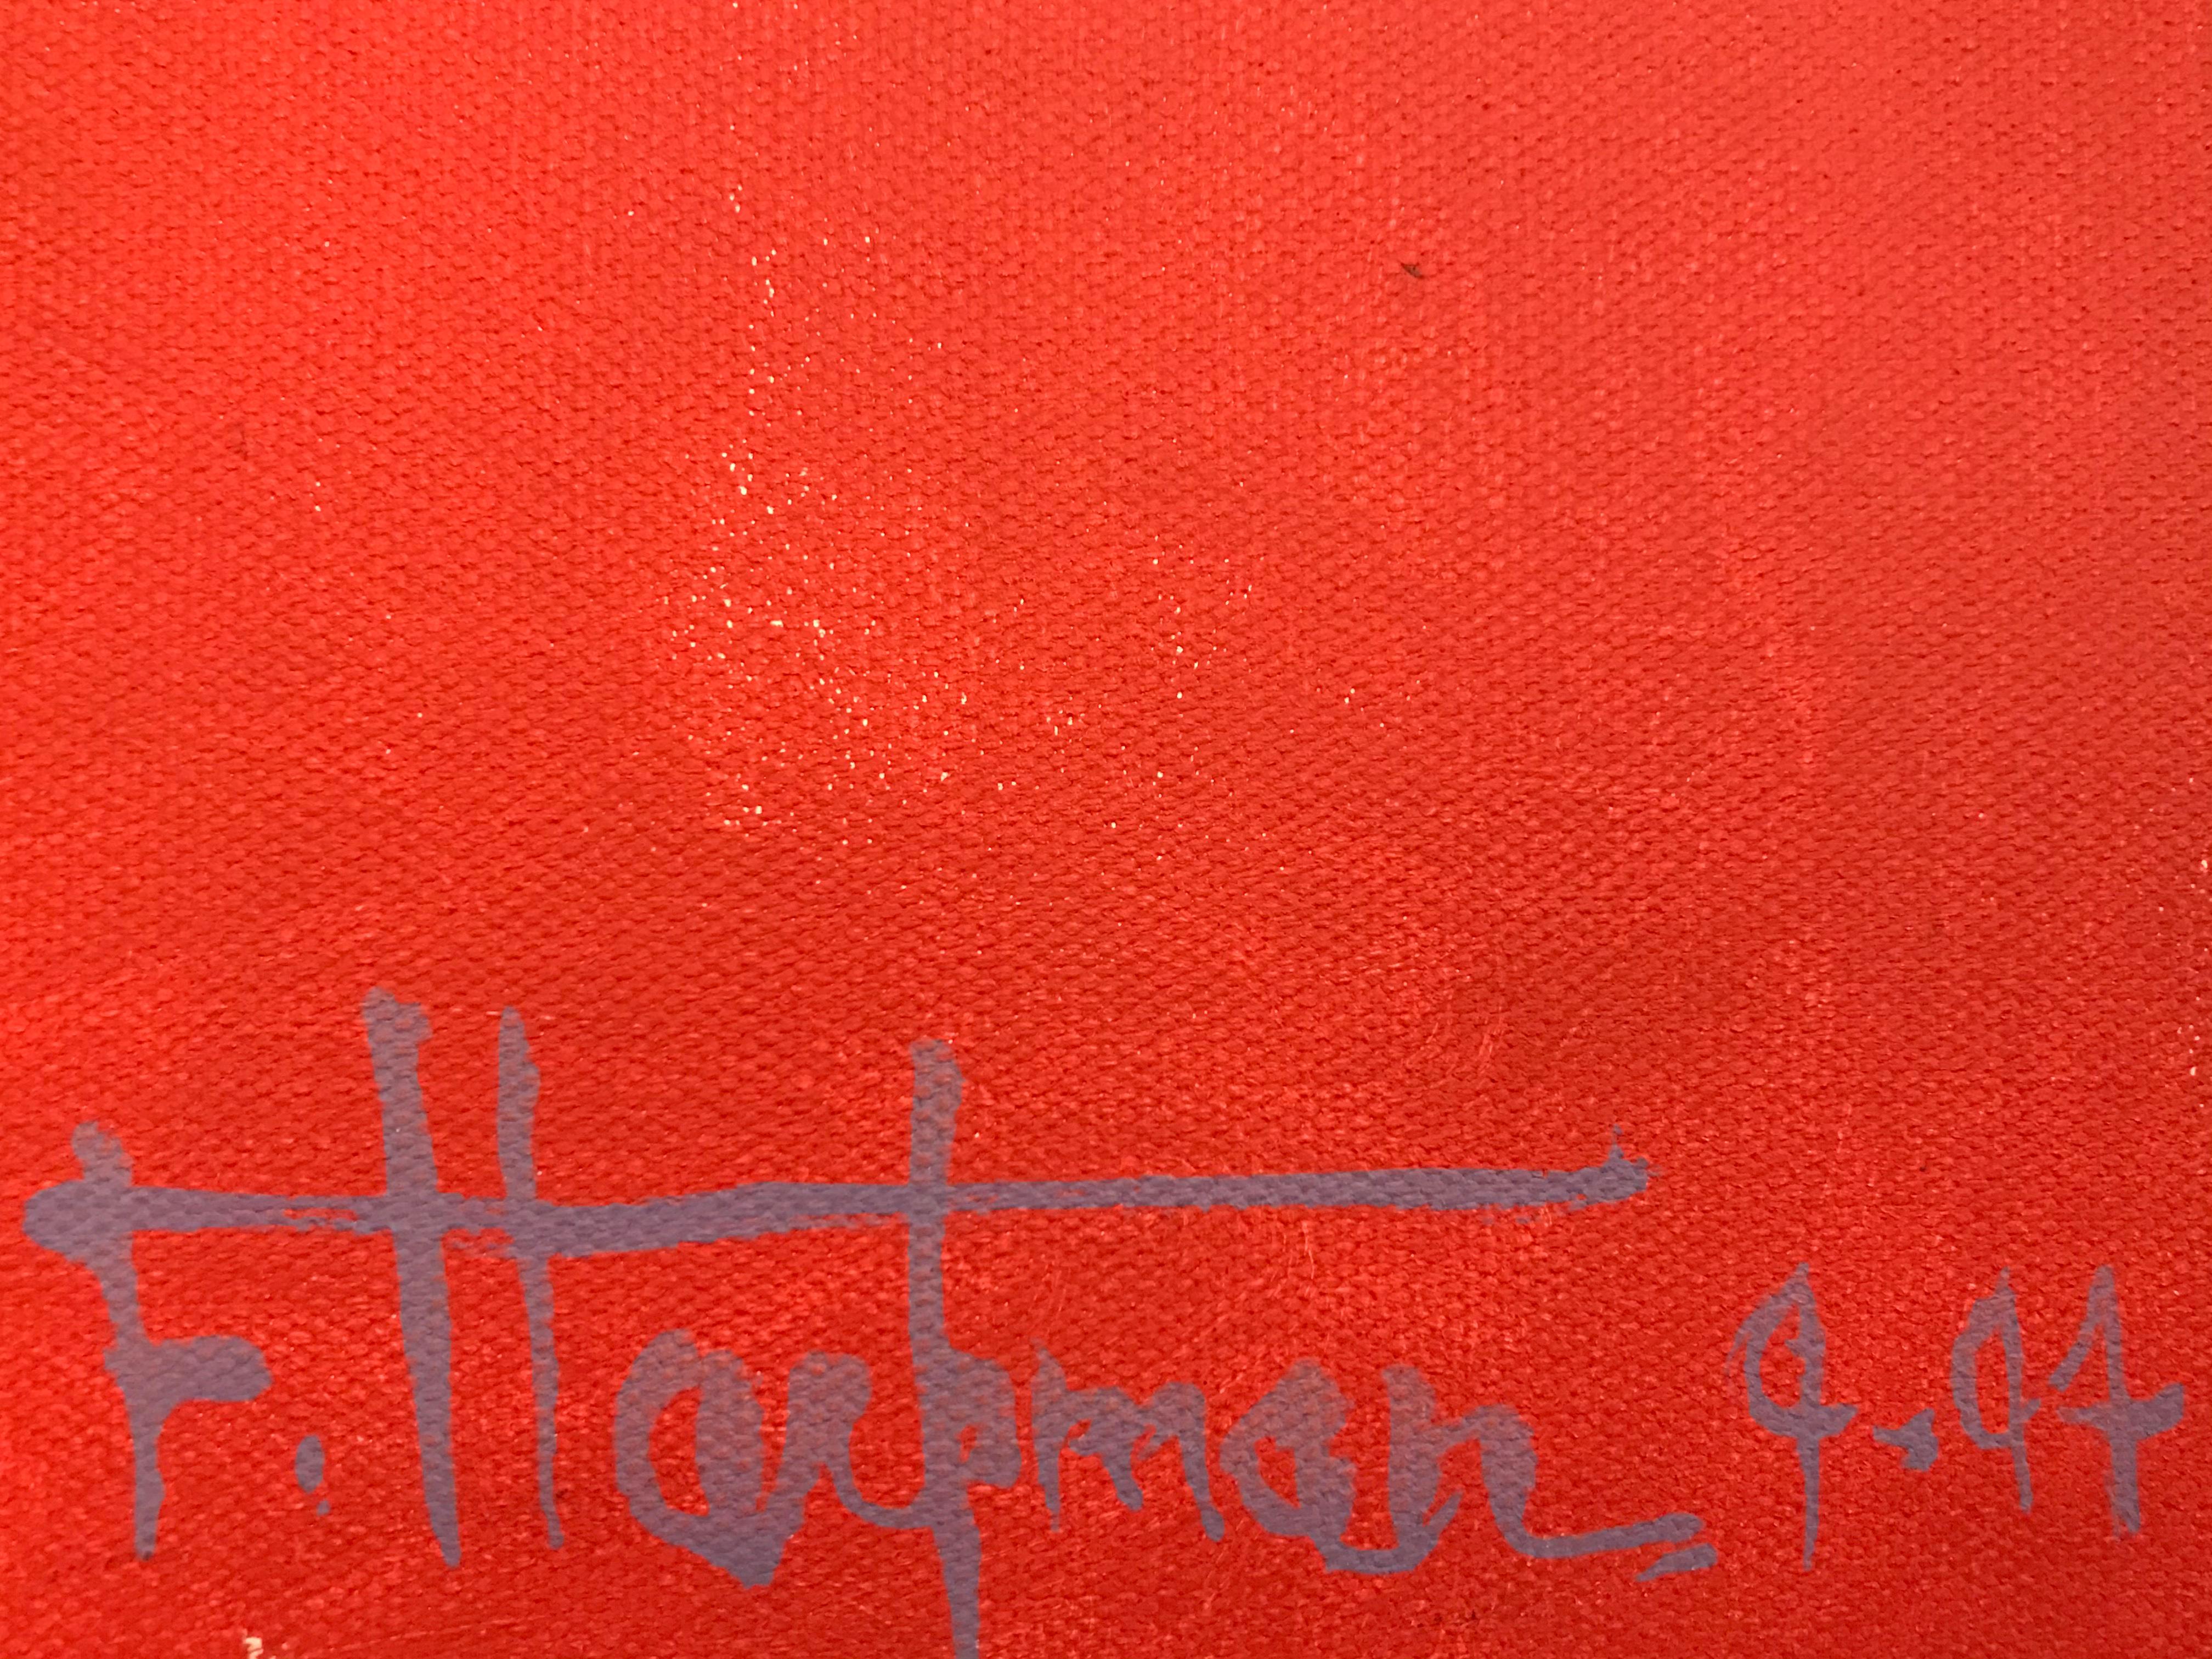 Hard Edge Painting signed F. Hartman In Good Condition For Sale In Pasadena, CA